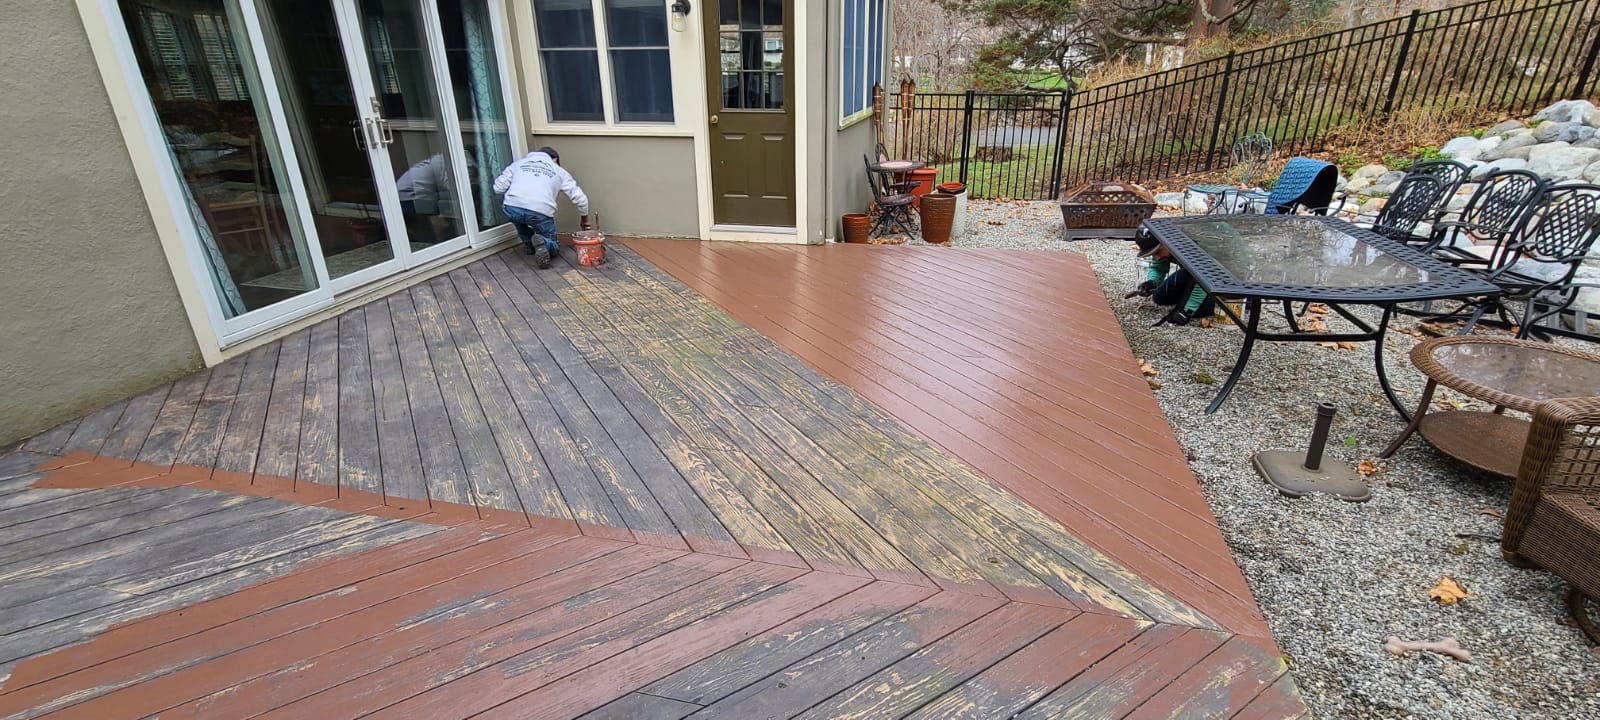 Sanding a deck and repainting it